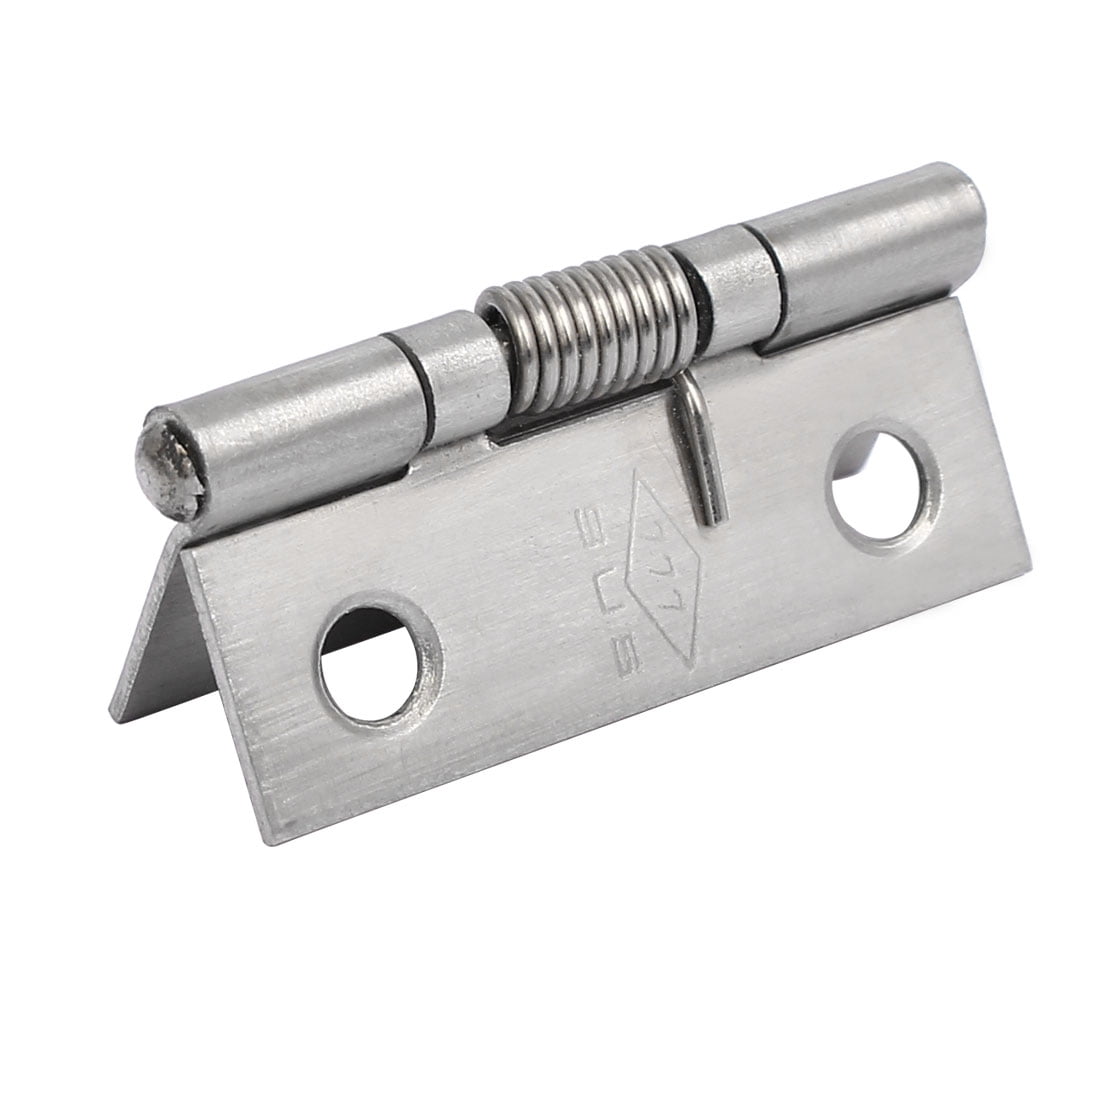 JJZXD Durable Stainless Steel Door Hinge Heavy Duty Automatic Self Closing Spring Hinges for Corridors Boilers Entrances Furniture